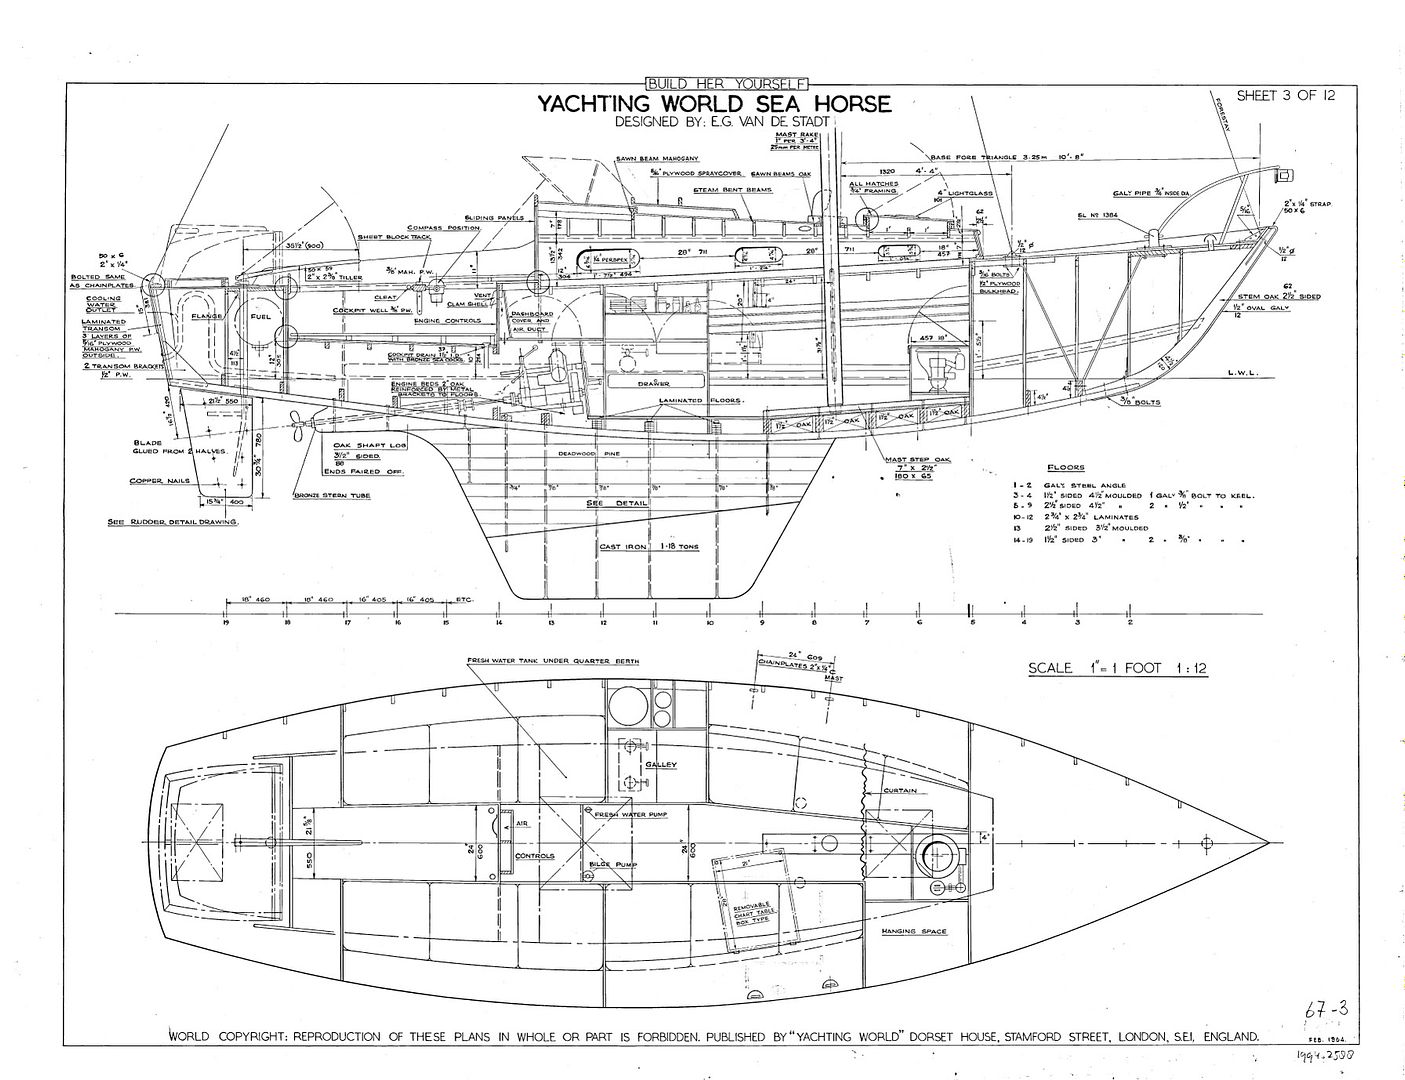 Free Trimaran Plans http://forum.woodenboat.com/showthread.php?85458 